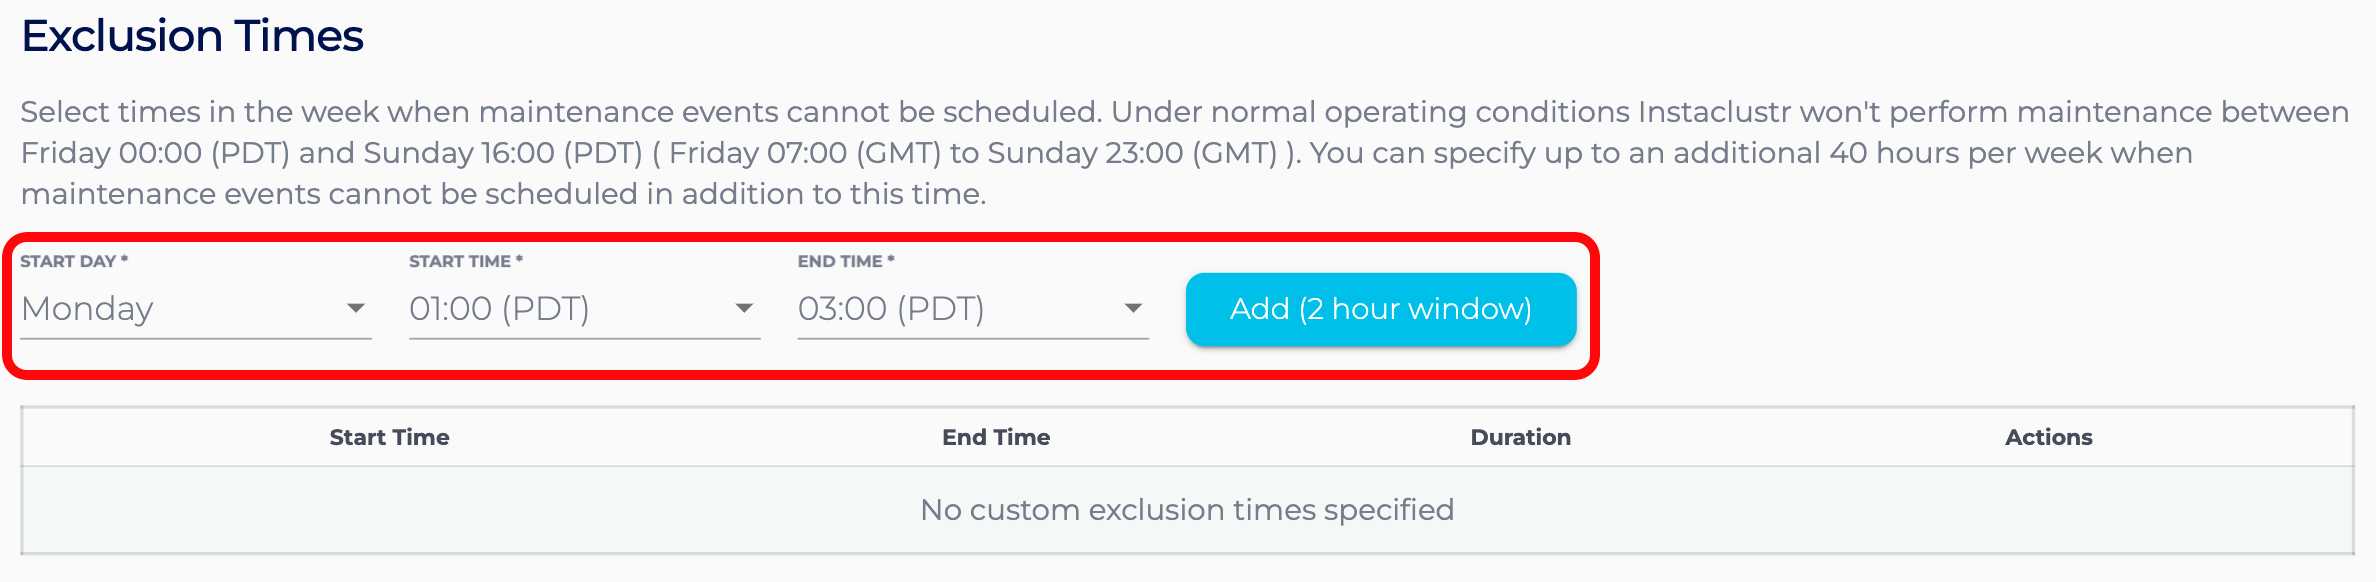 Select the day and time for your exclusion time and then press the "Add" button to create it